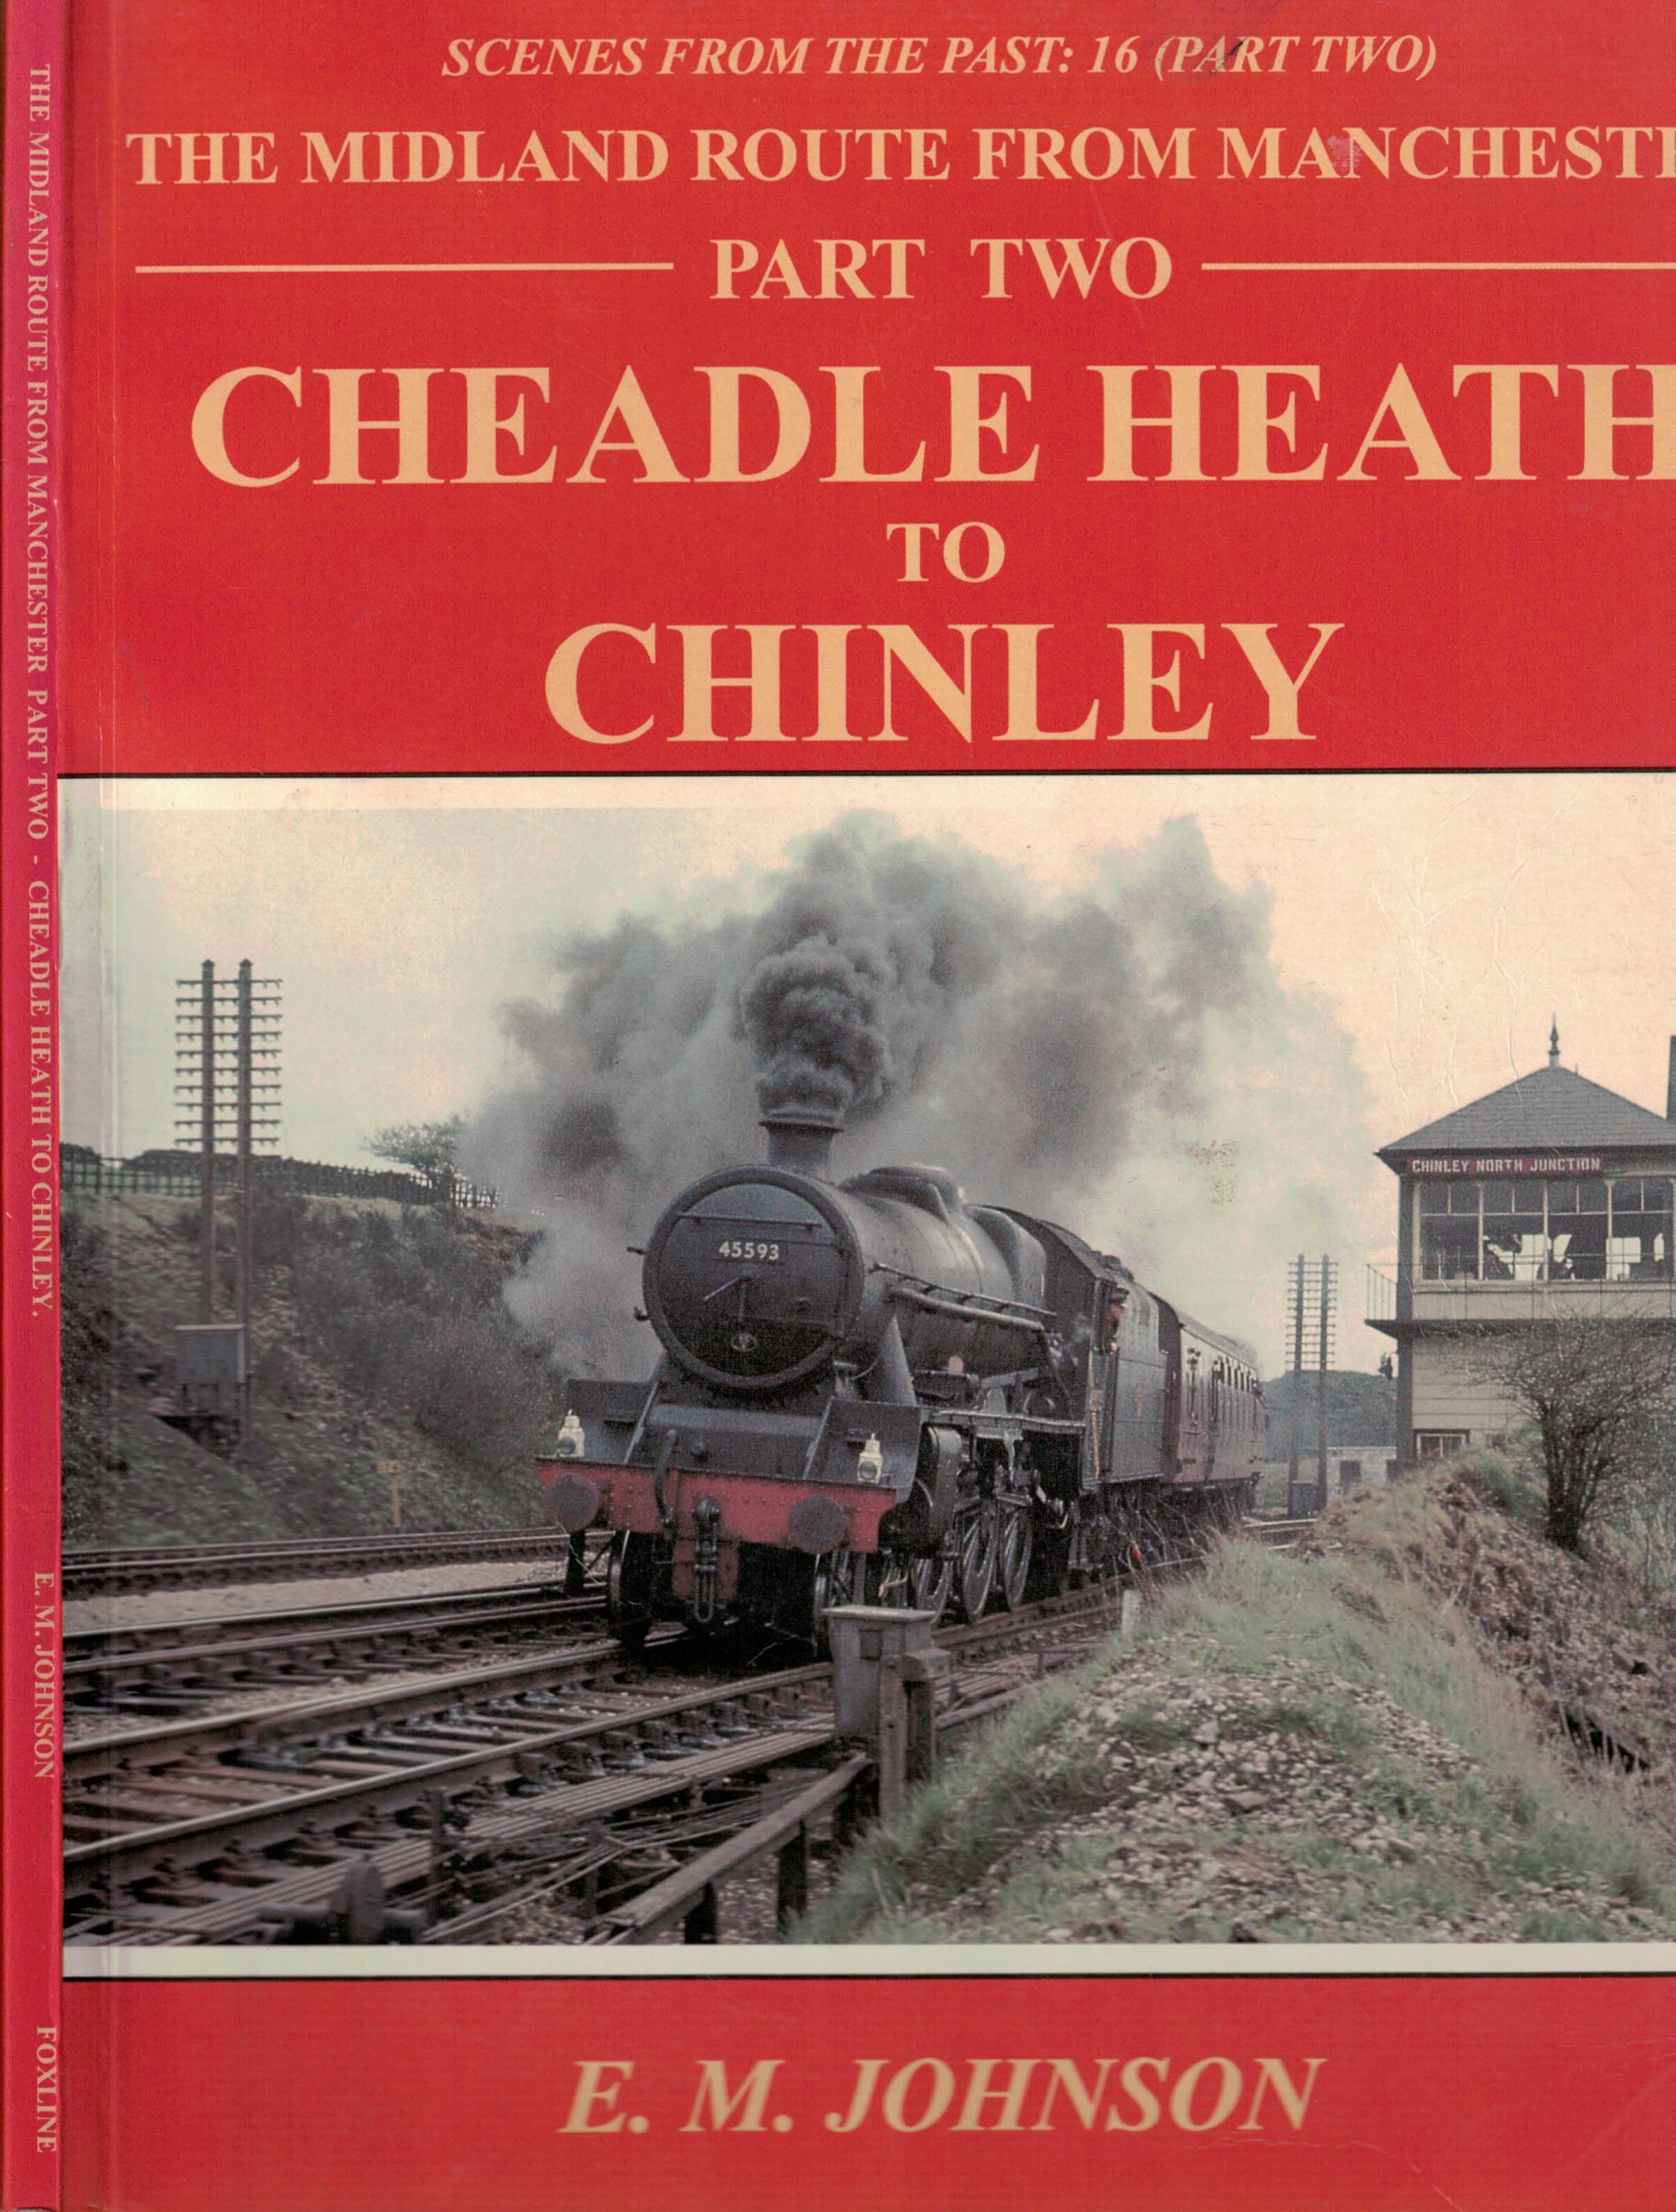 The Midland Route from Manchester, Part Two: Cheadle Heath to Chinley. Scenes from the Past No 16.